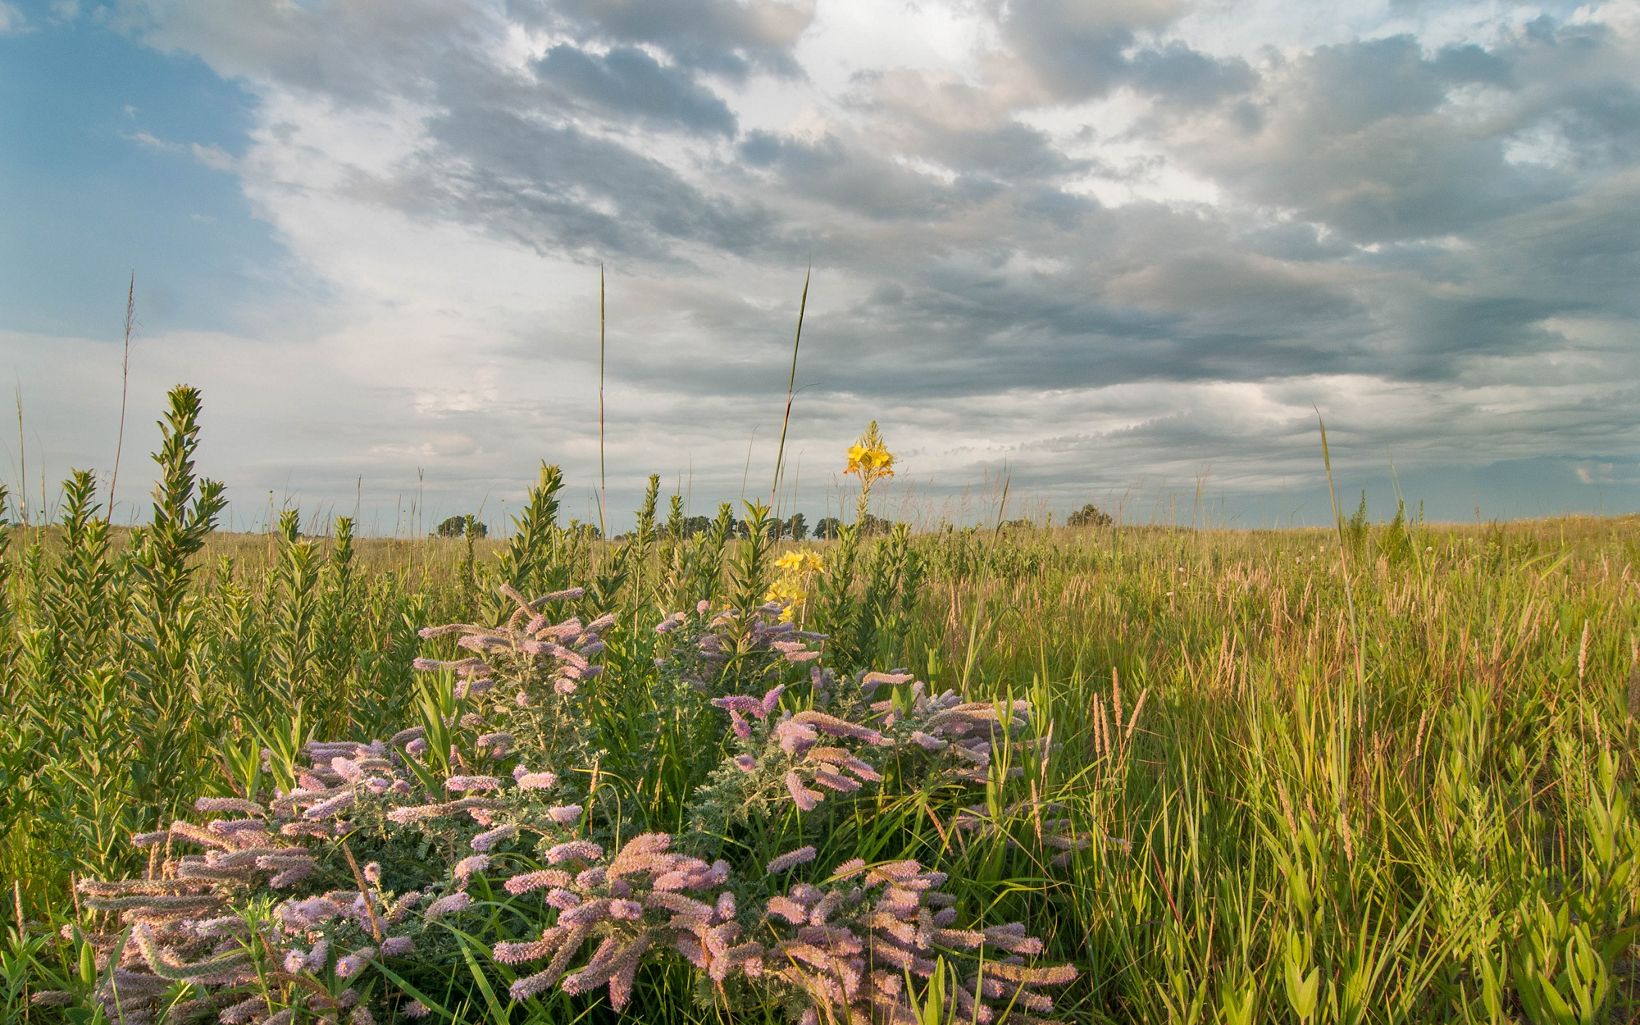 Purple and yellow flowers, seen in summer months, grow amongst green prairie grasses under a partly cloudy sky.